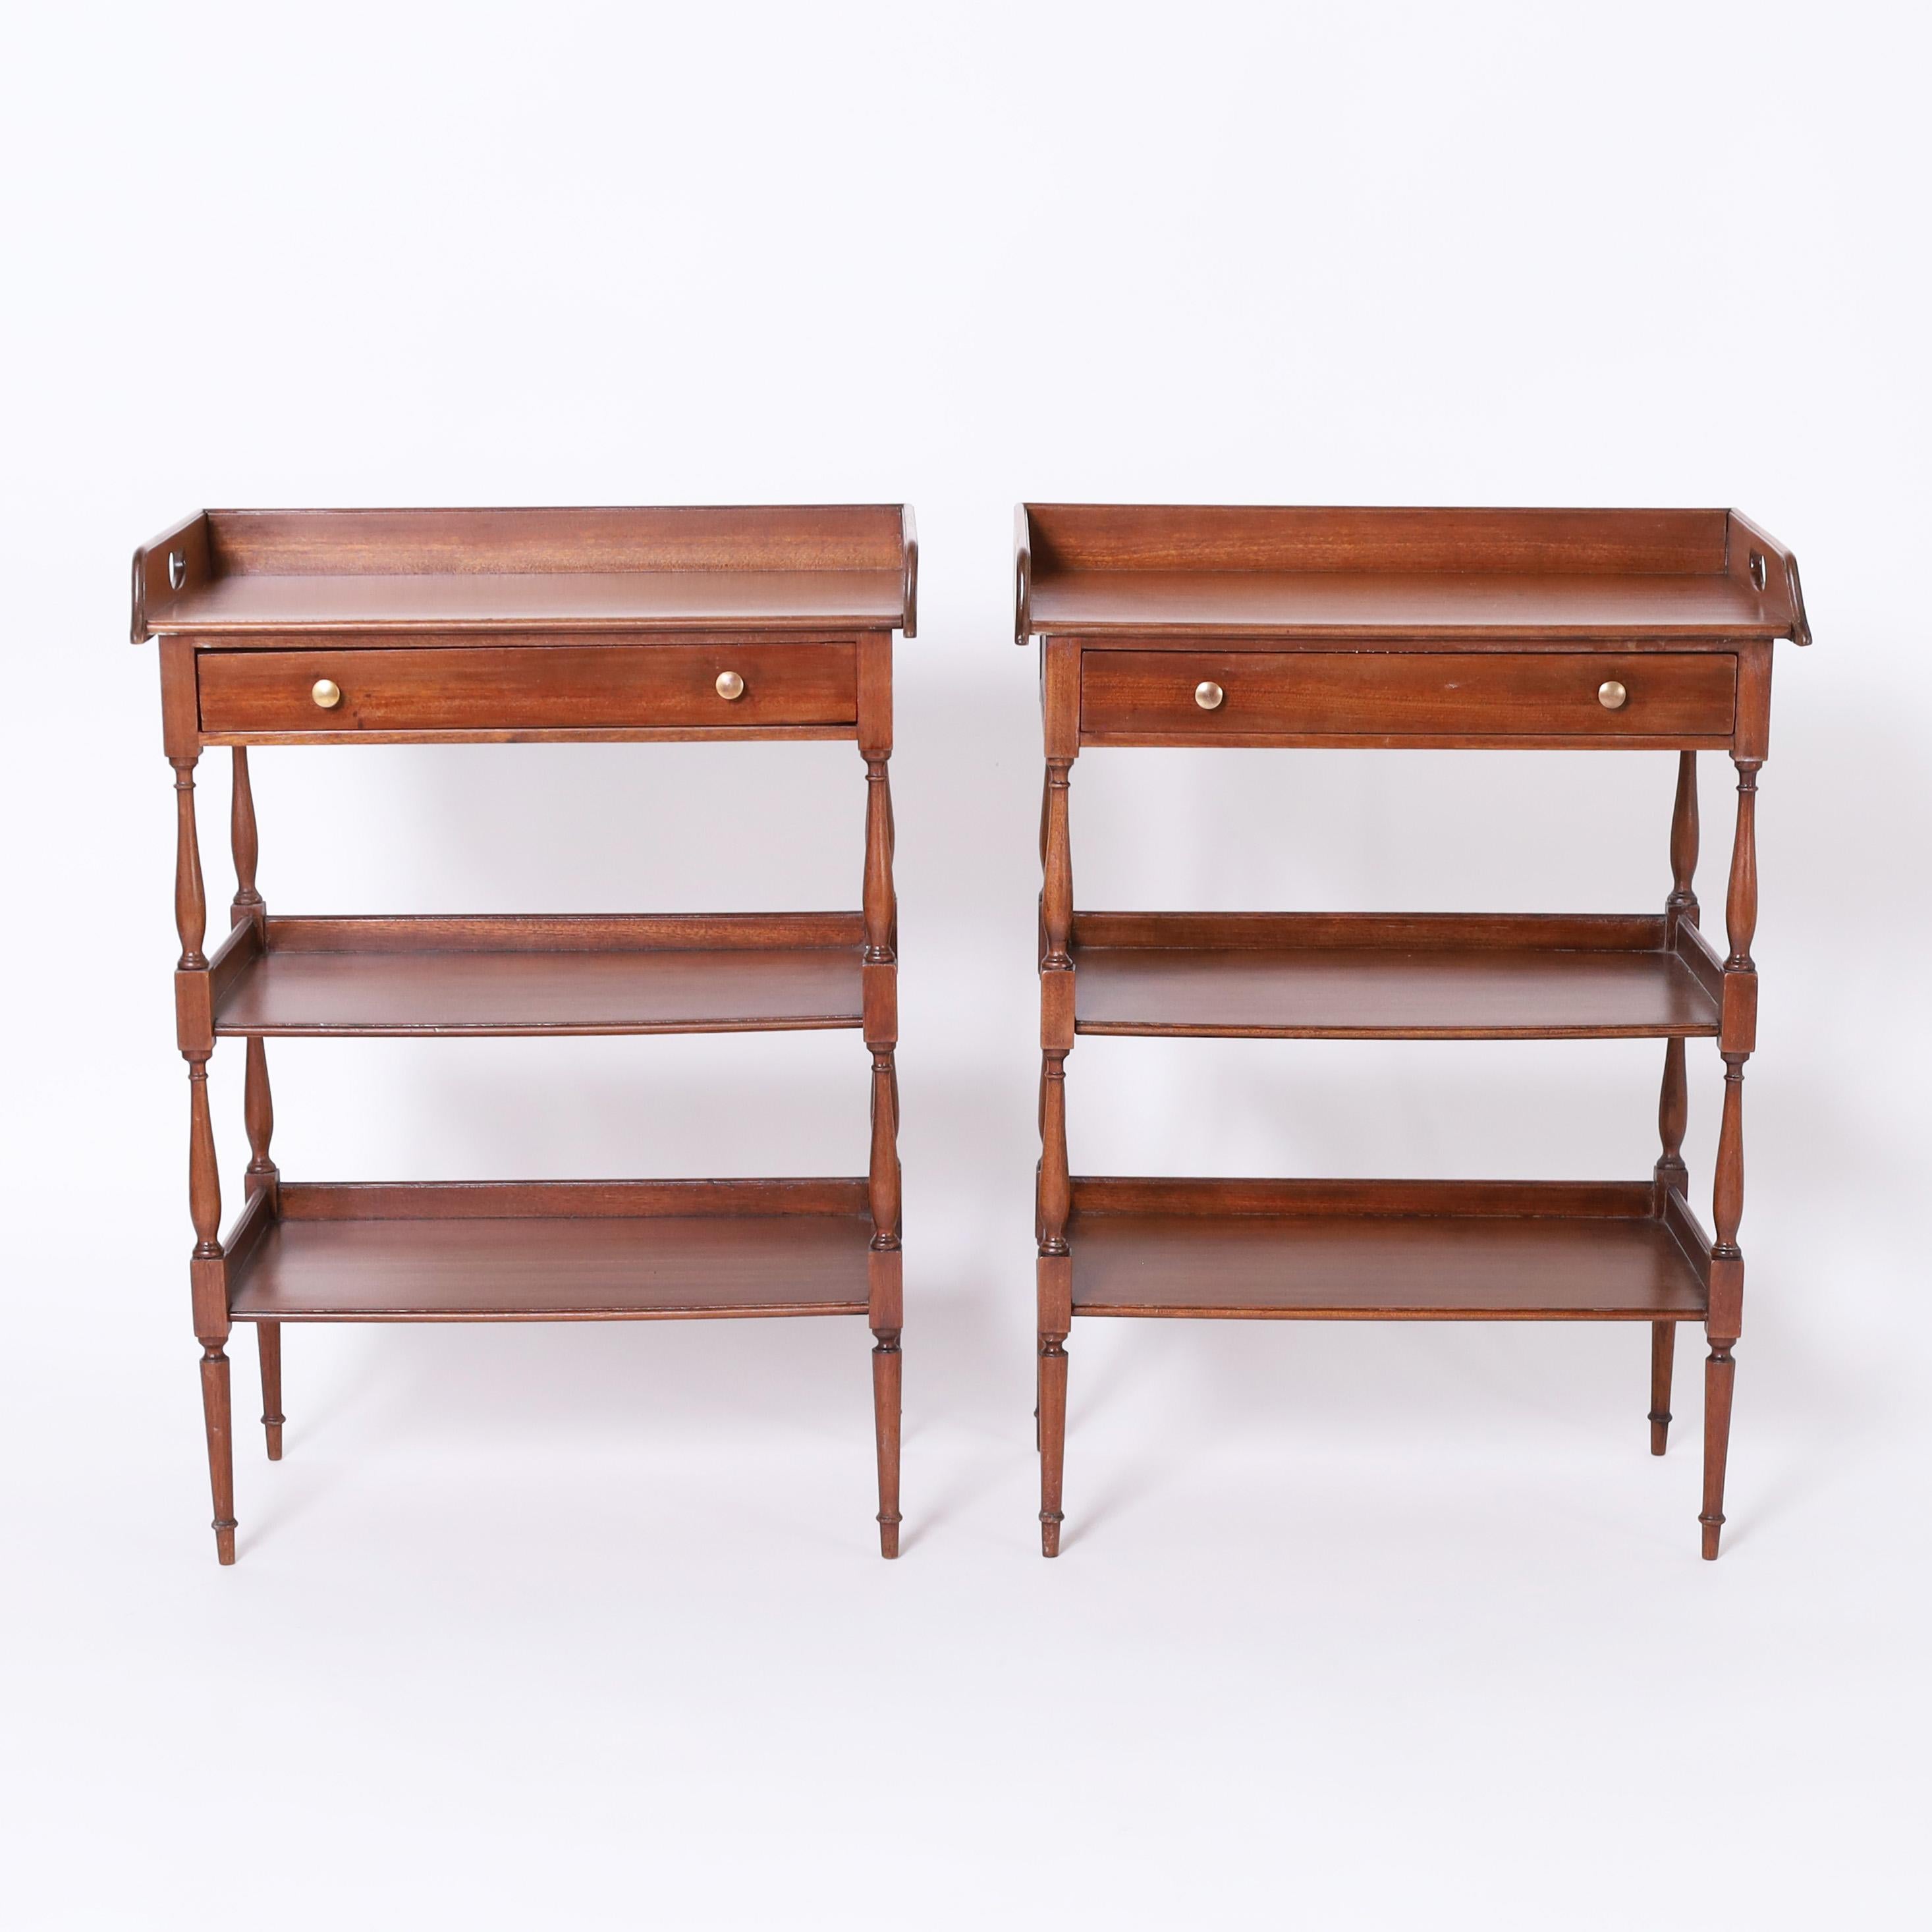 Handsome pair of English stands crafted in mahogany with an attached tray form top over two lower tiers having elegant turned supports on tapered legs.